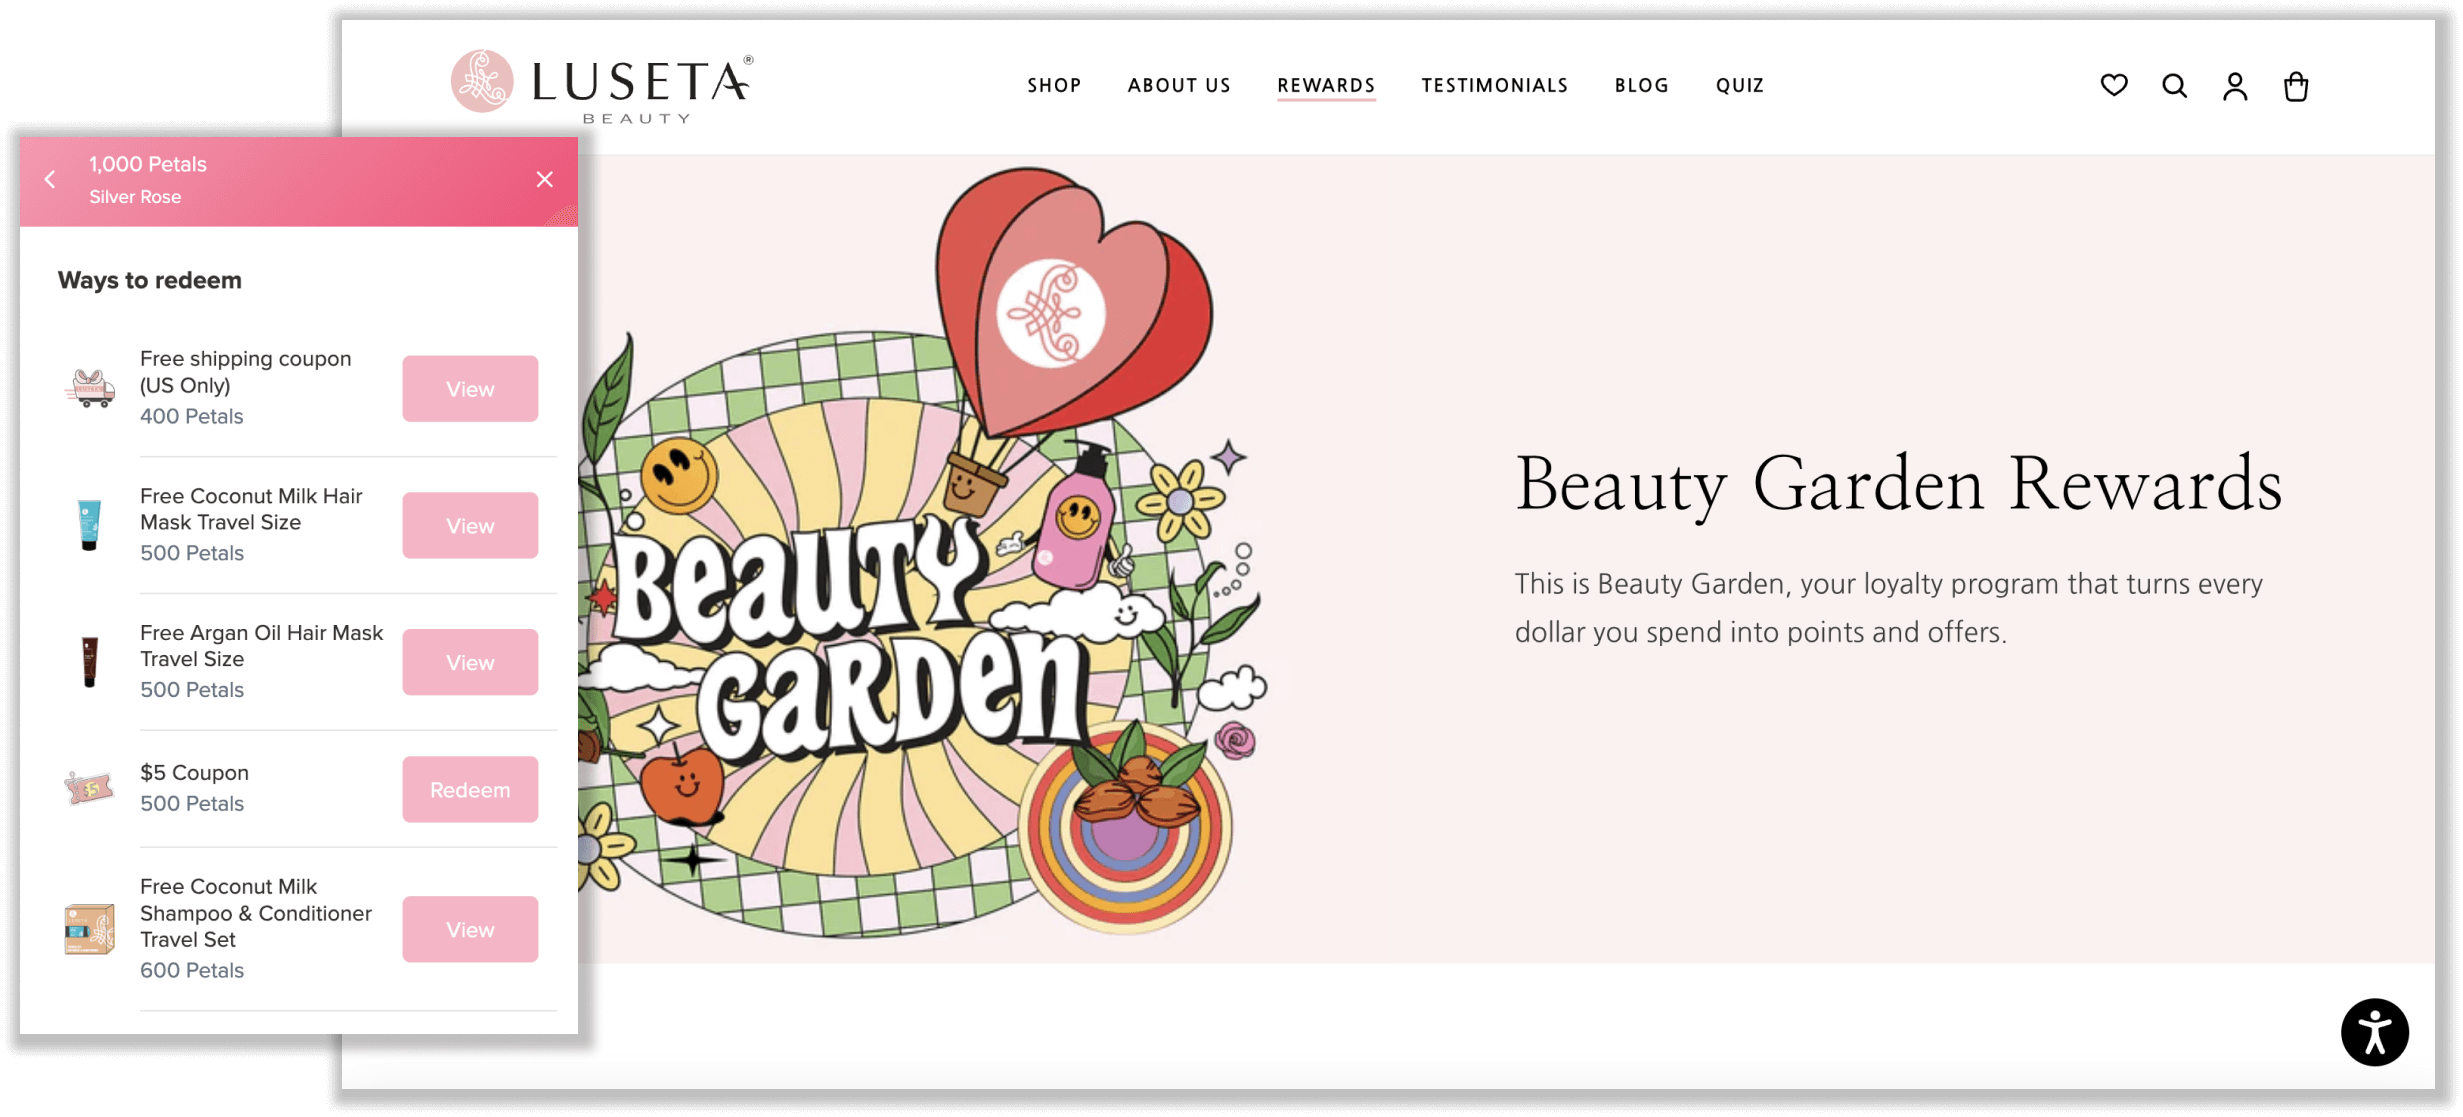 A screenshot from Lustea’s Beauty Garden rewards program explainer page. The rewards program panel is visible showing the different rewards available for redemption including a travel-size Coconut Milk Hair Mask, Argan Oil Hair Mask, Coconut Milk Shampoo and Conditioner set, and more. 